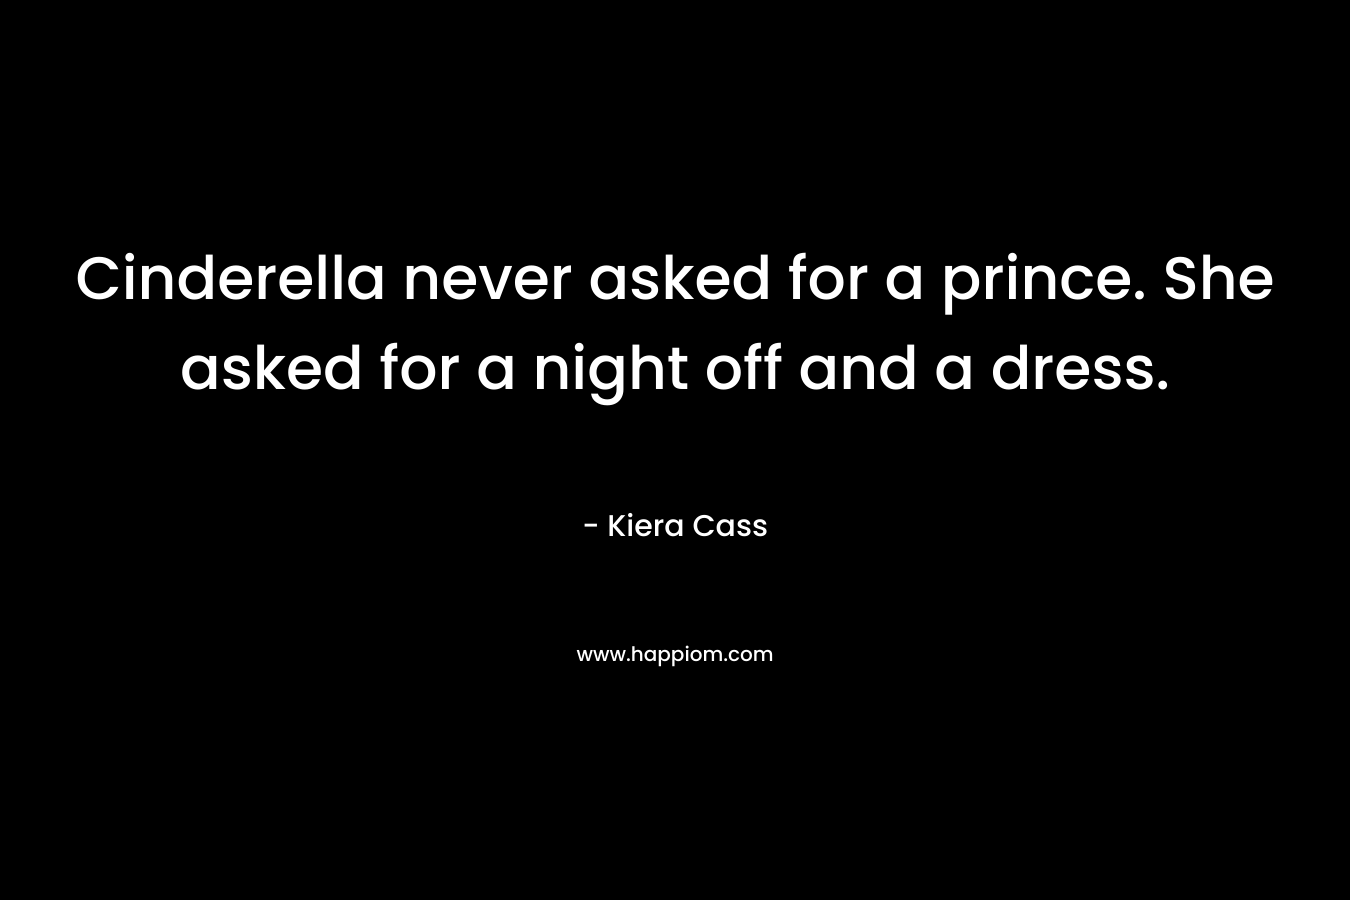 Cinderella never asked for a prince. She asked for a night off and a dress.